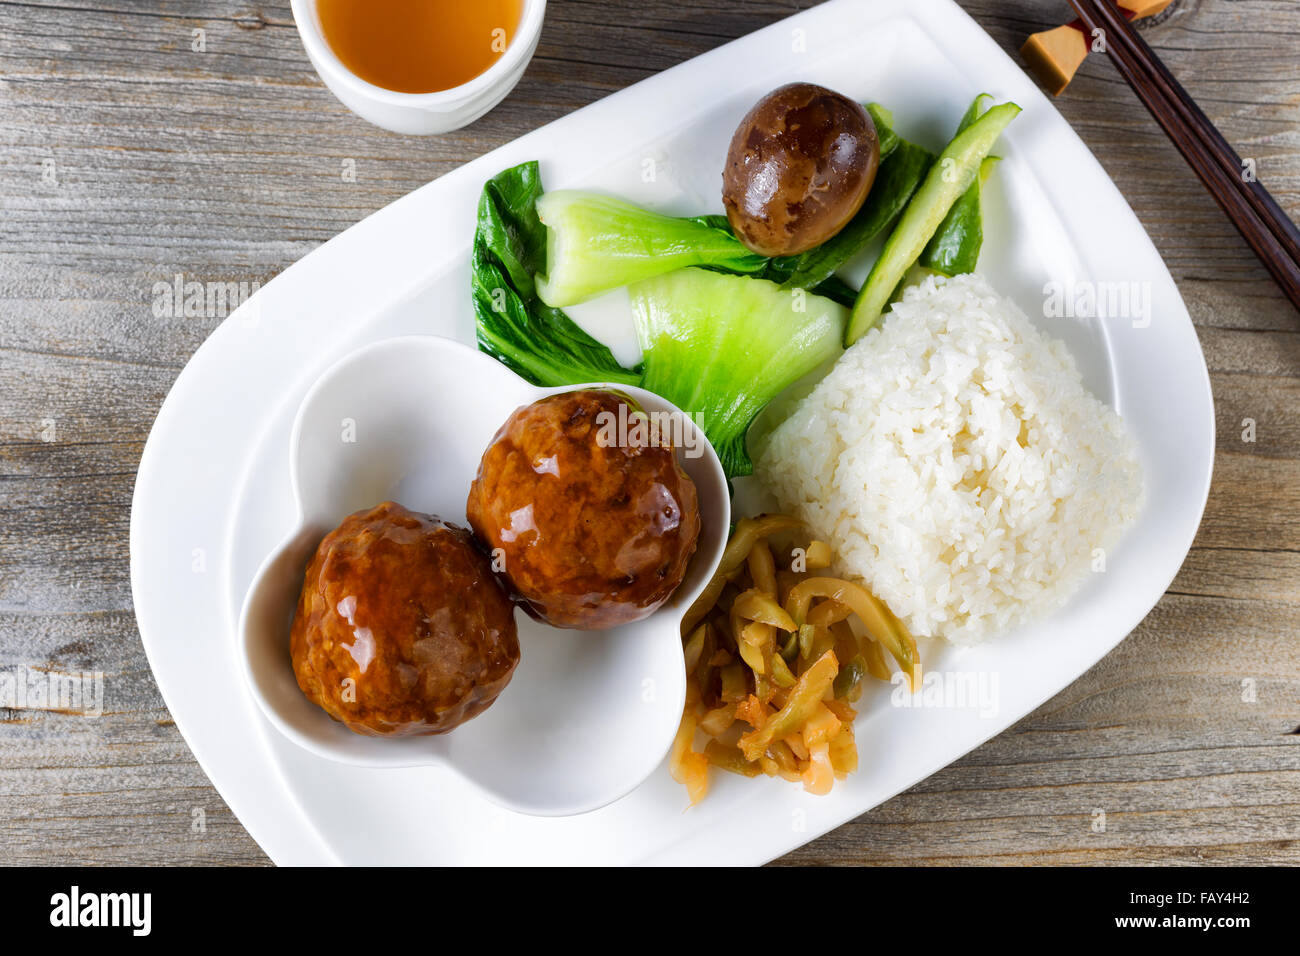 High angled view of Asian saucy meatballs, rice, egg, cucumber and bok choy on white plate. Stock Photo